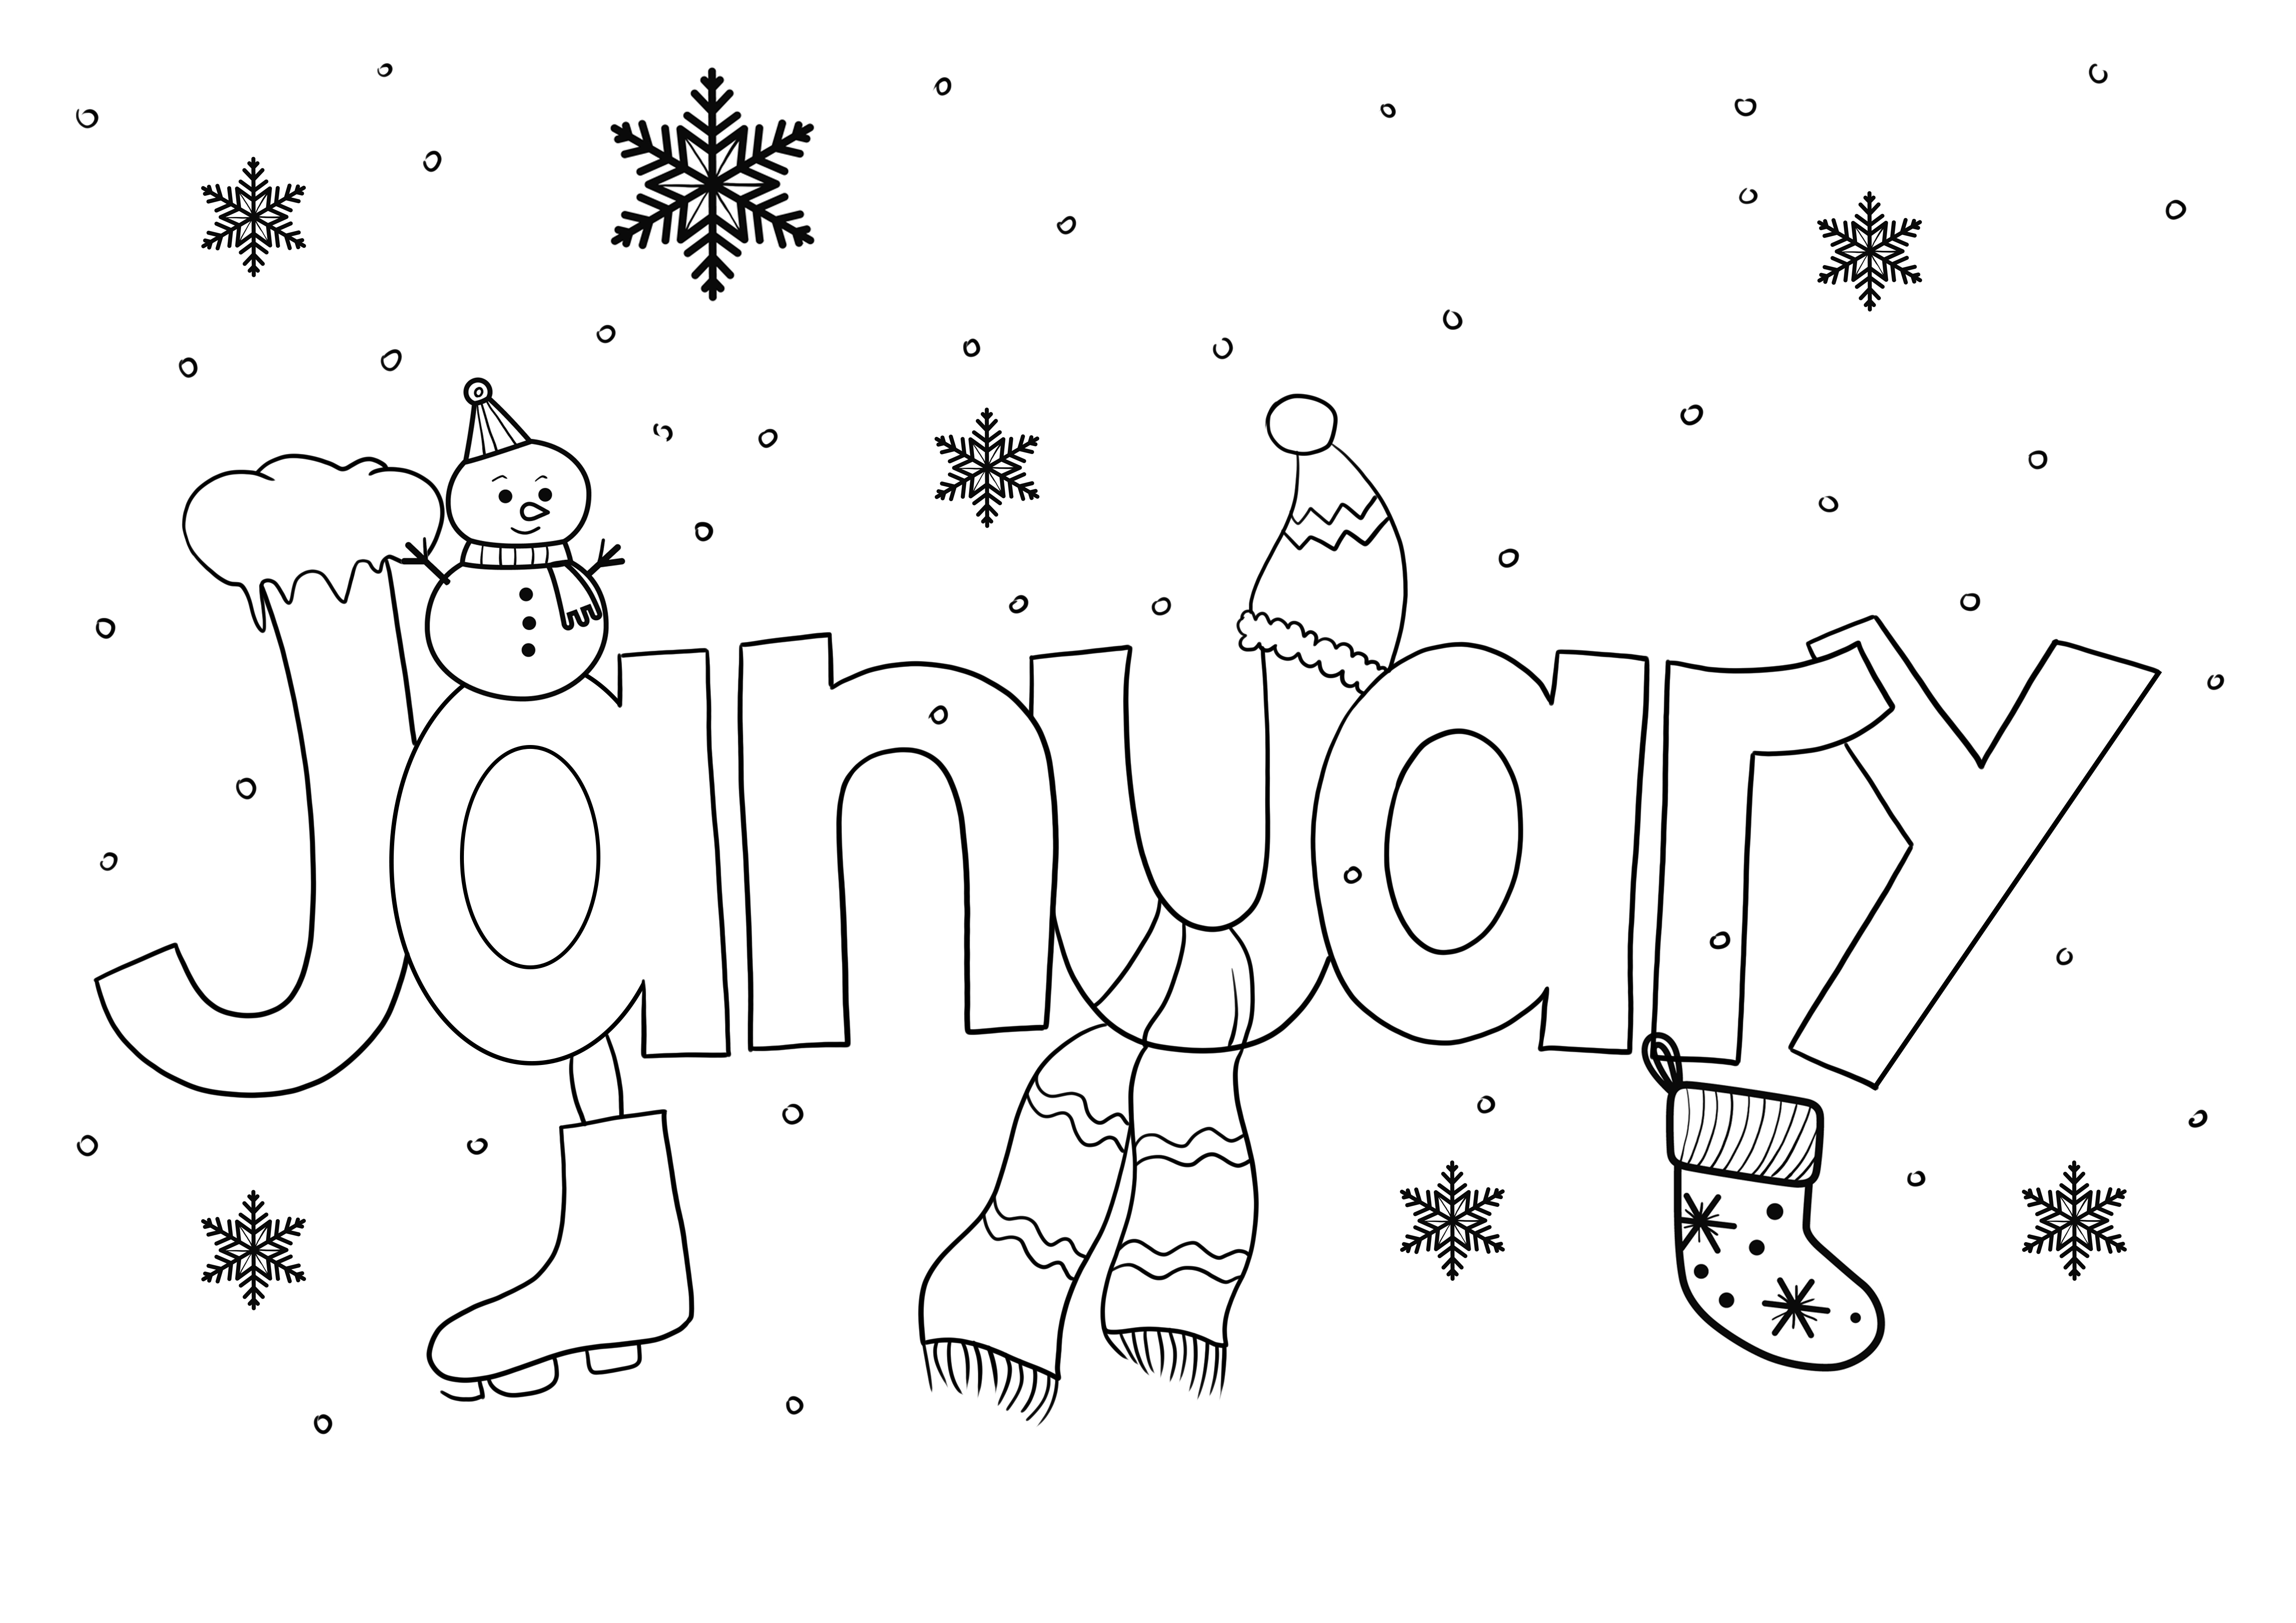 january-free-coloring-pages